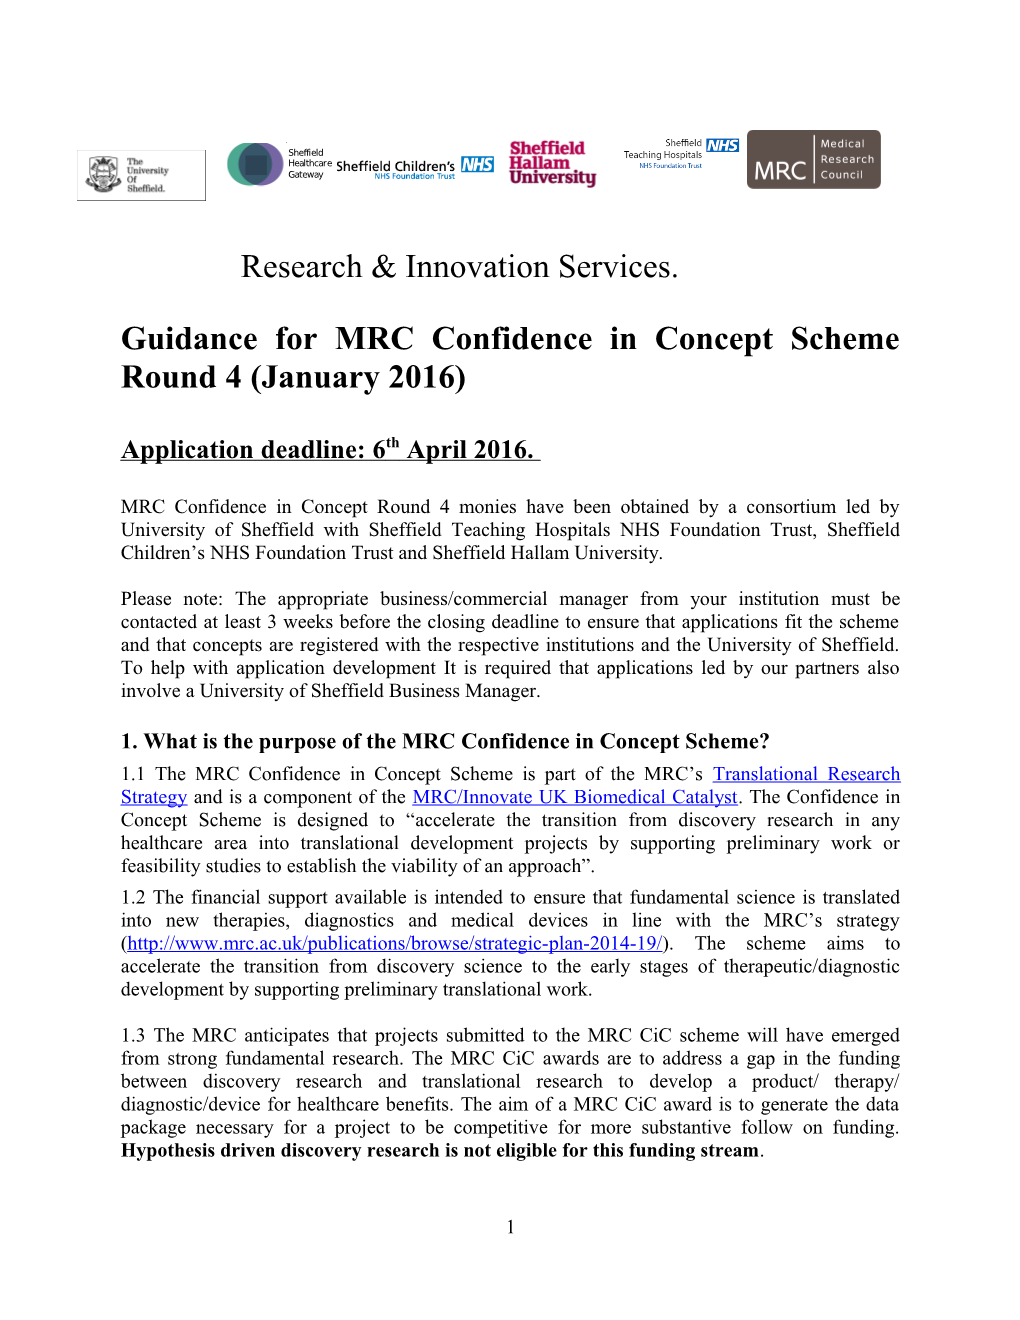 Guidance for MRC Confidence in Concept Scheme Round 4 (January 2016)